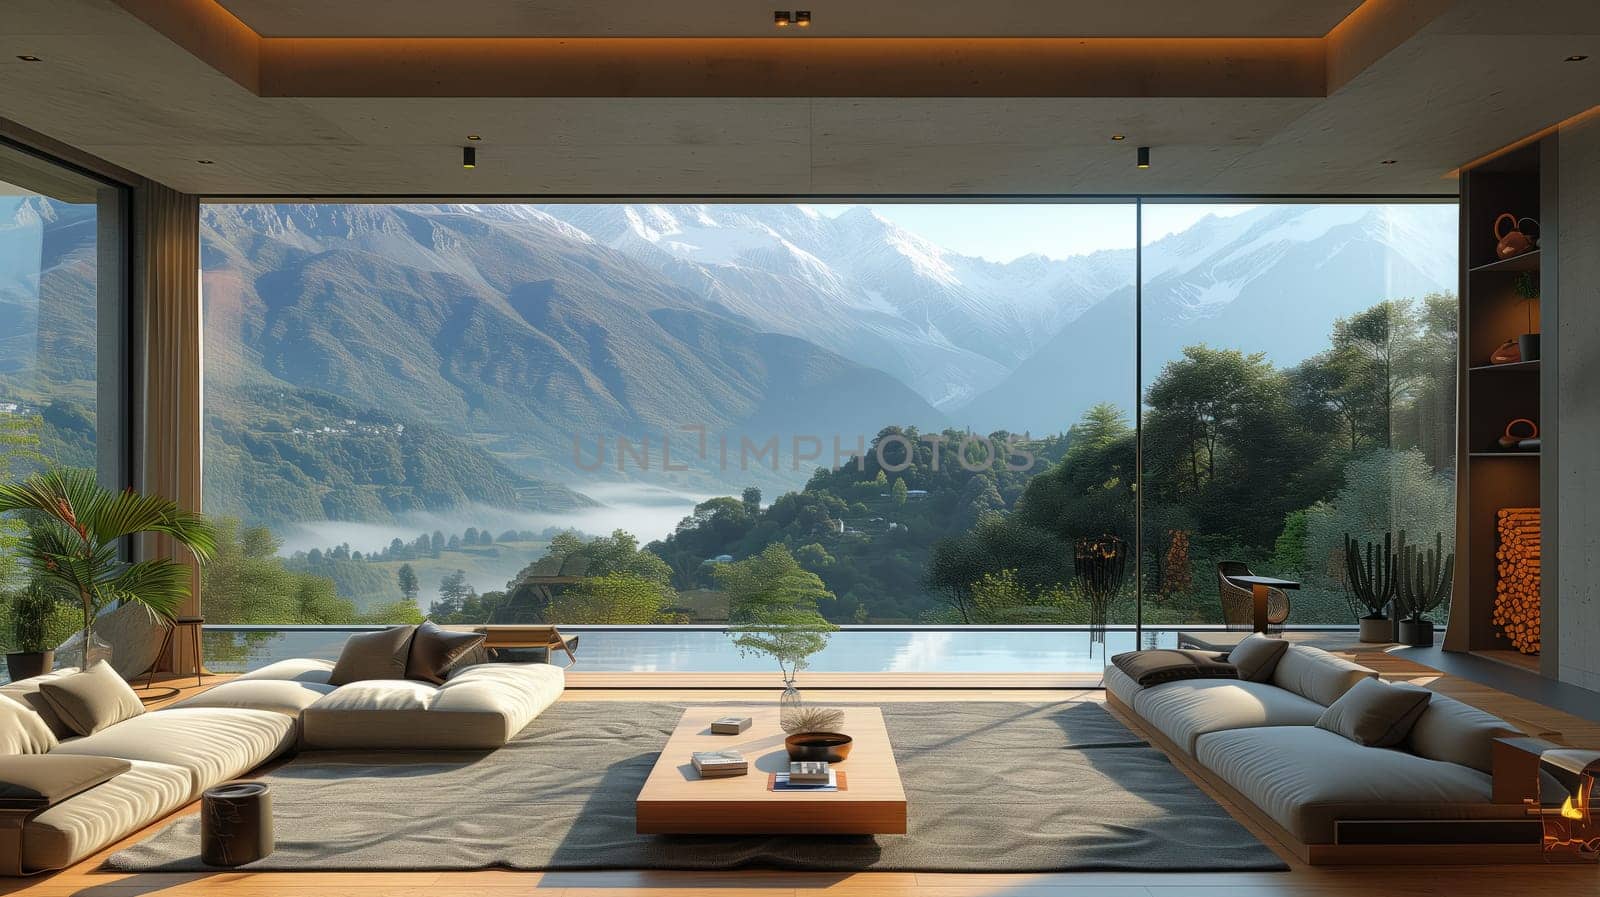 Building with interior design overlooking mountains, lake, and sky by richwolf